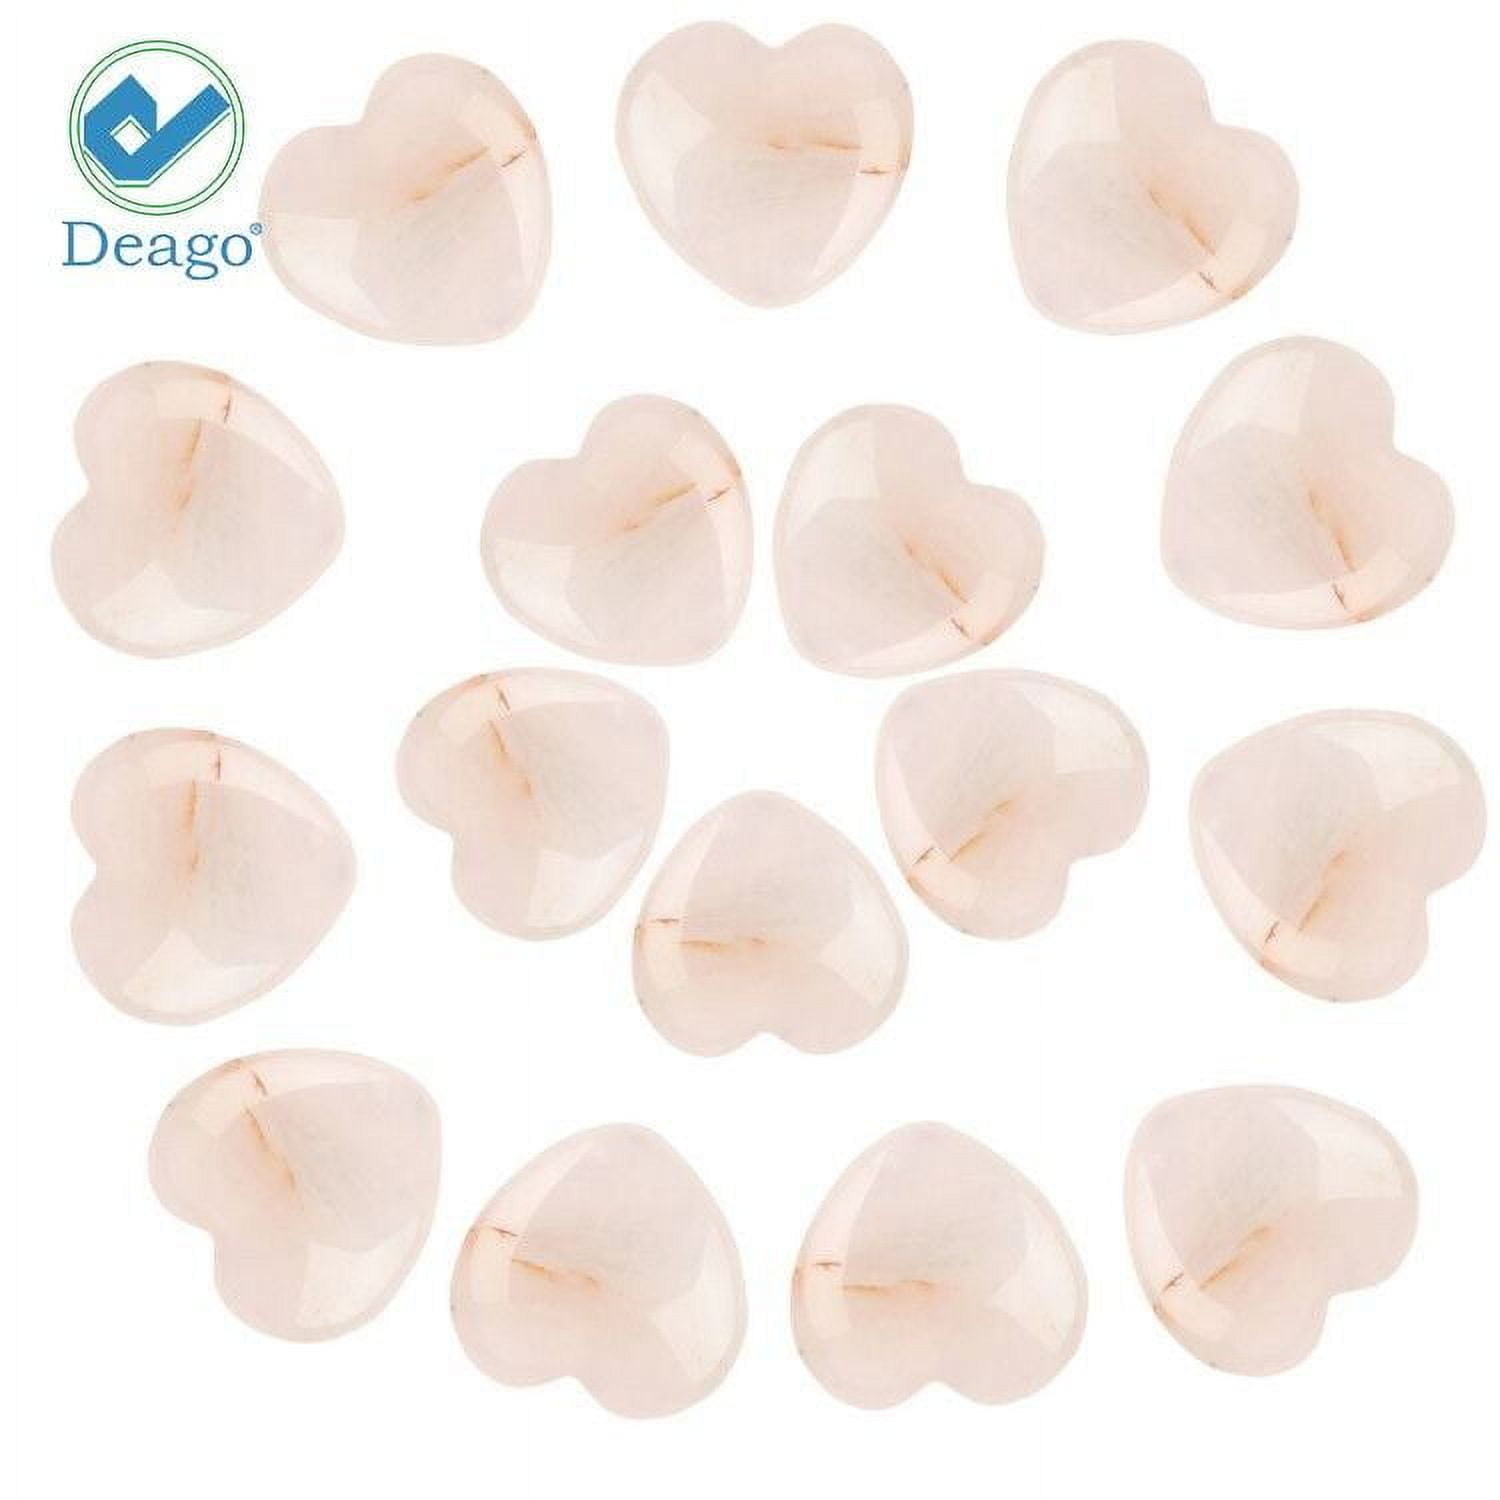 10 Pcs Heart Rose Quartz Crystals, Natural Polished Rose Quartz Stone, Heart Love Carved Healing Crystal Stone Worry Stone